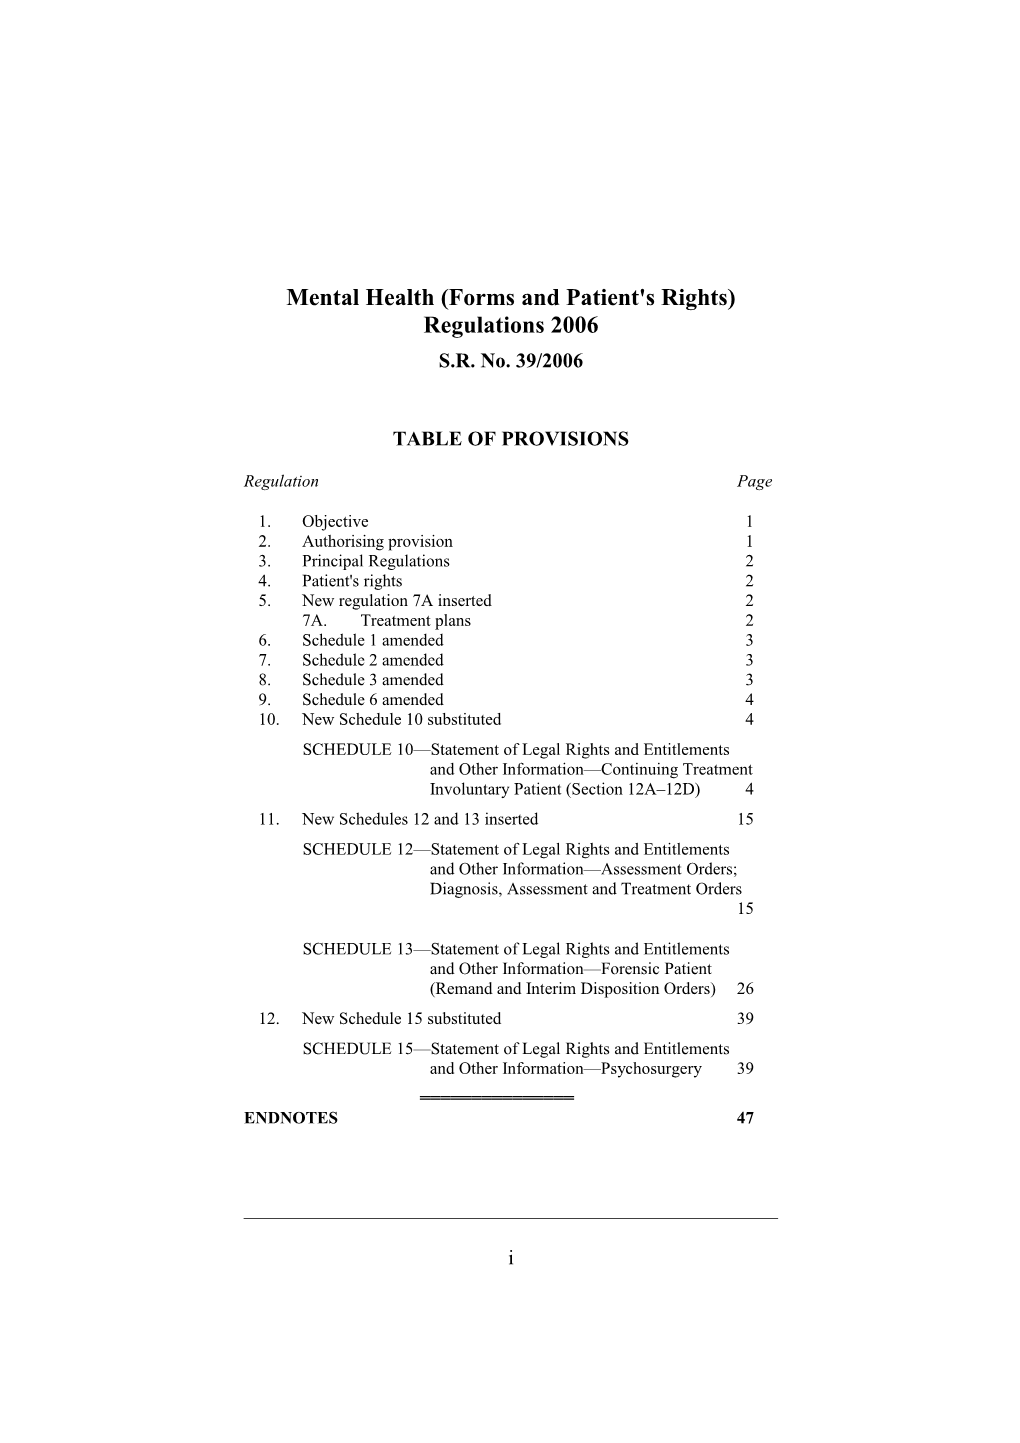 Mental Health (Forms and Patient's Rights) Regulations 2006